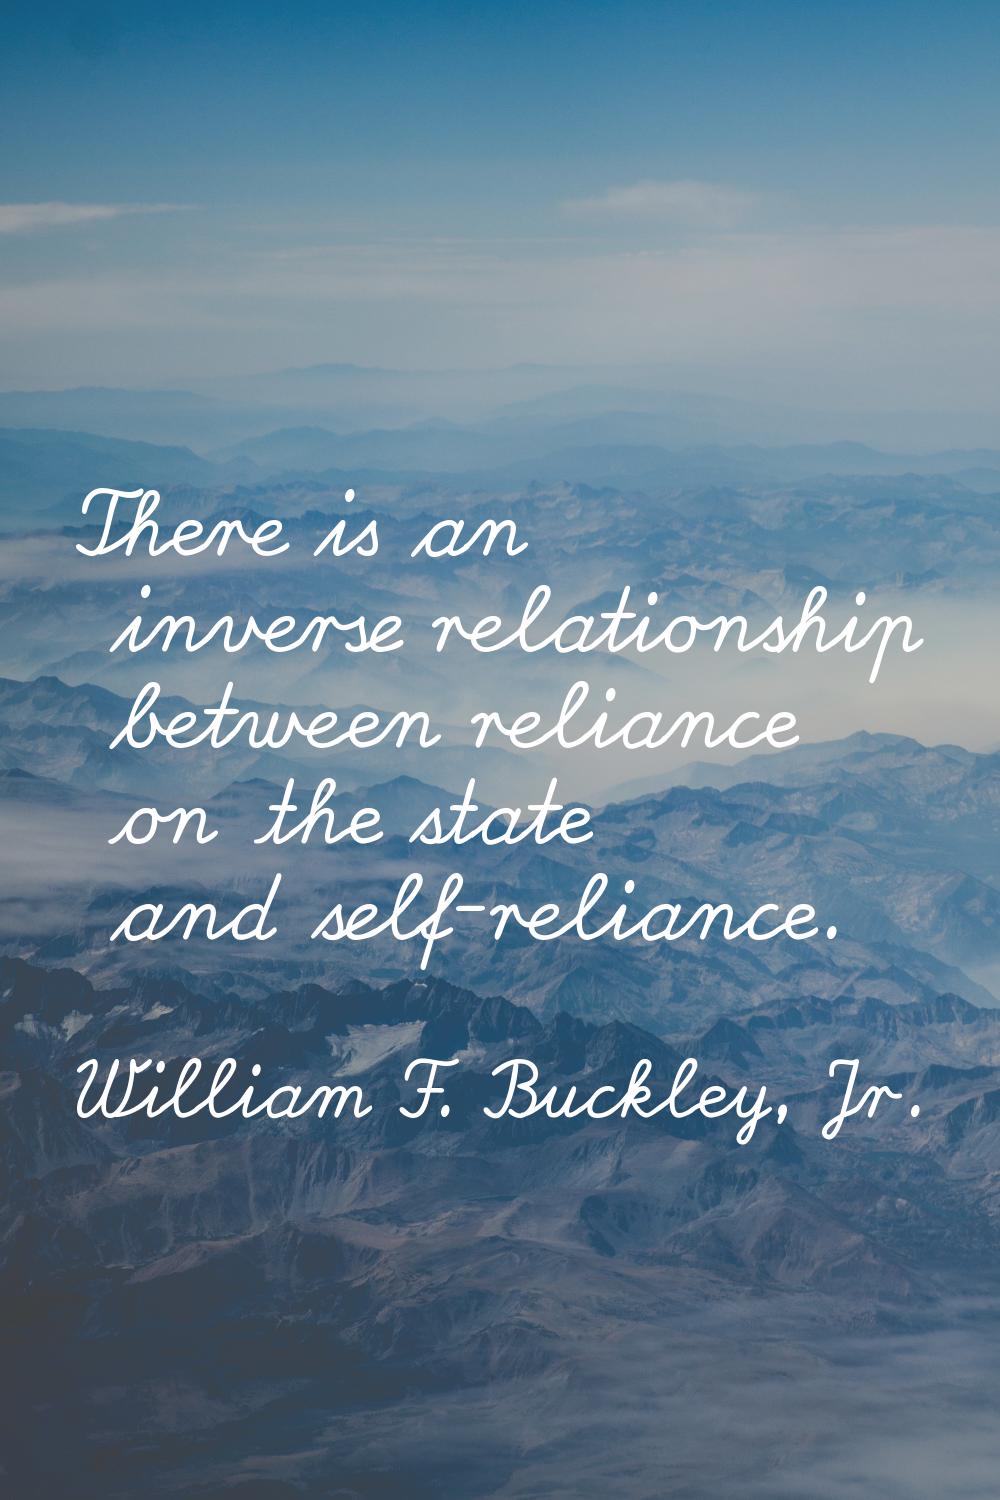 There is an inverse relationship between reliance on the state and self-reliance.